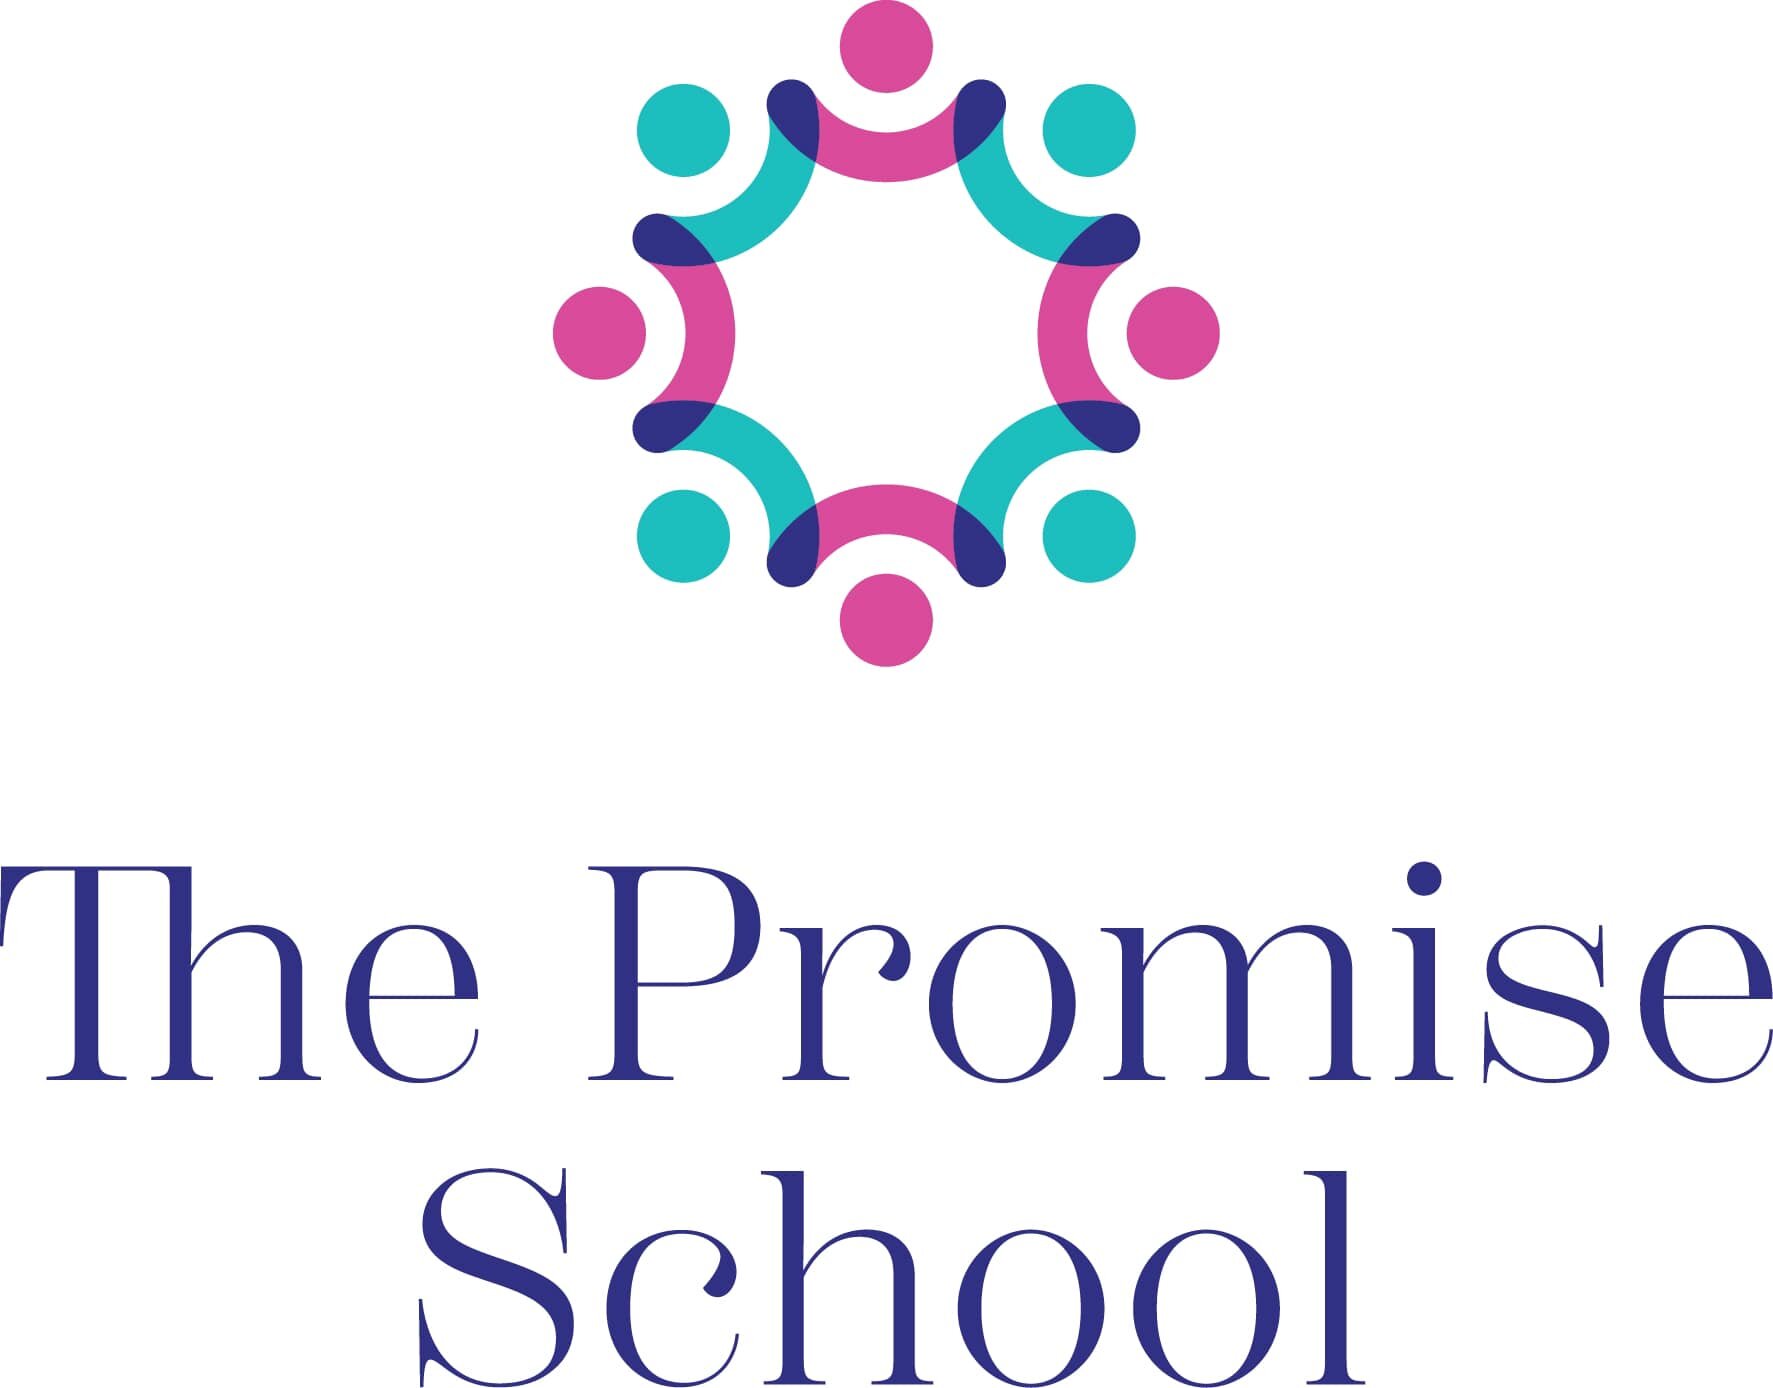 NEW SCHOOL ALERT! Opening for the 2023-2024 school year in 29464, The Promise School will be a safe, nurturing, and innovative private school serving the individual needs of students in grades 1-5 with a primary diagnosis of dyslexia or a language-ba